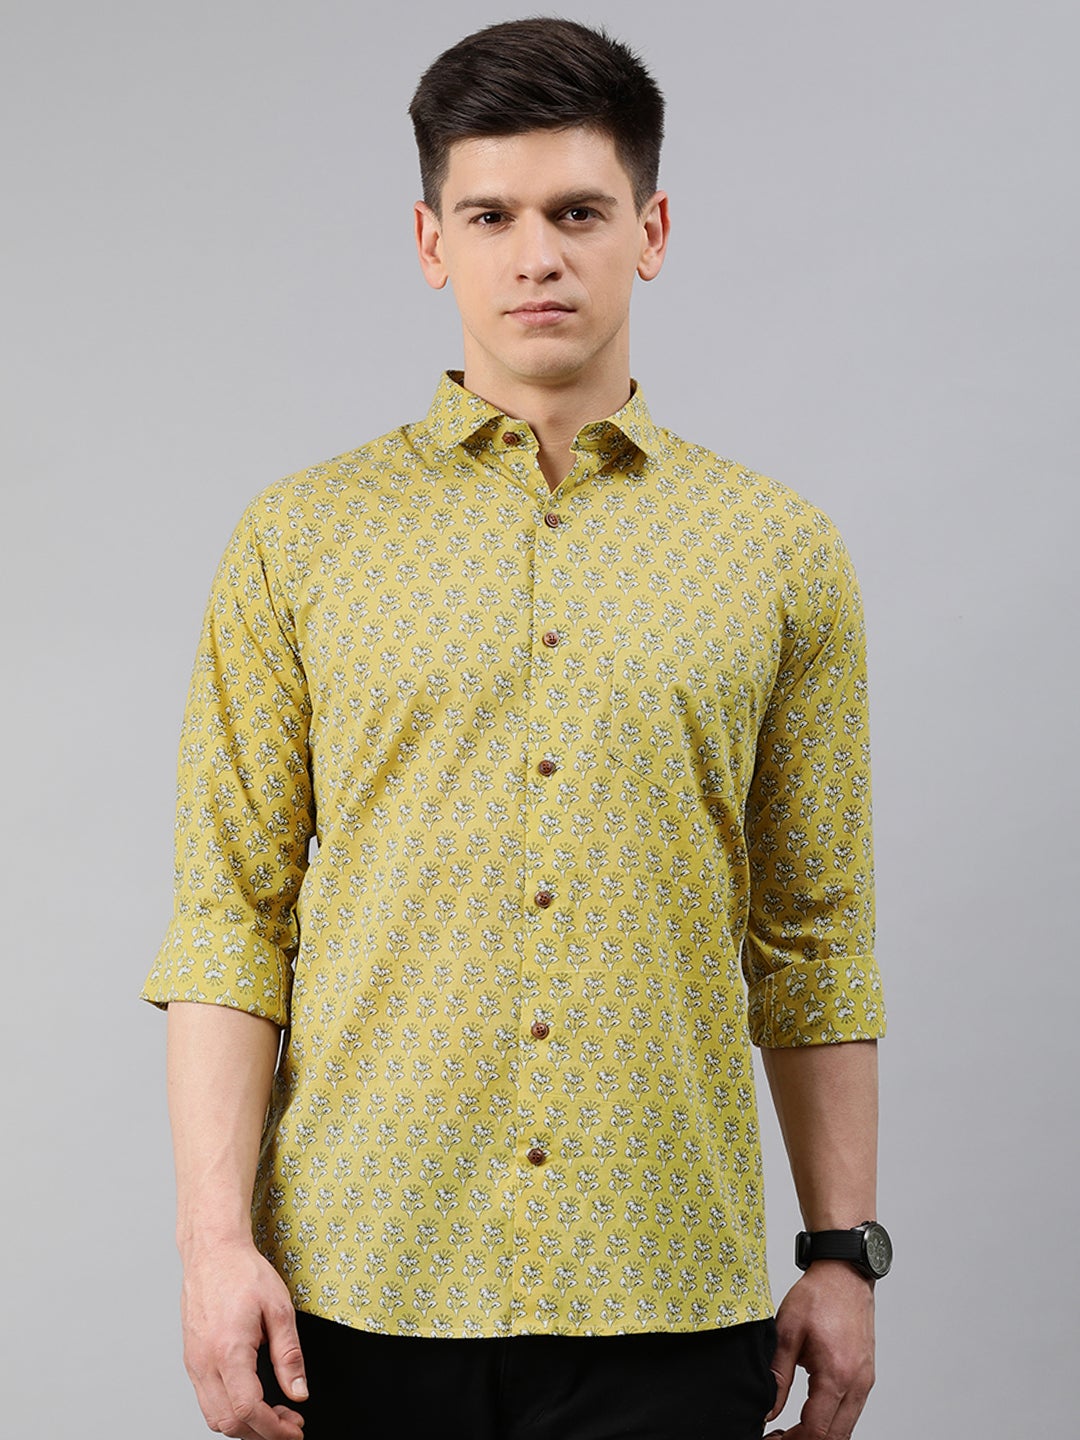 Yellow Cotton Full Sleeves Shirts For Men-MMF0225 - NOZ2TOZ